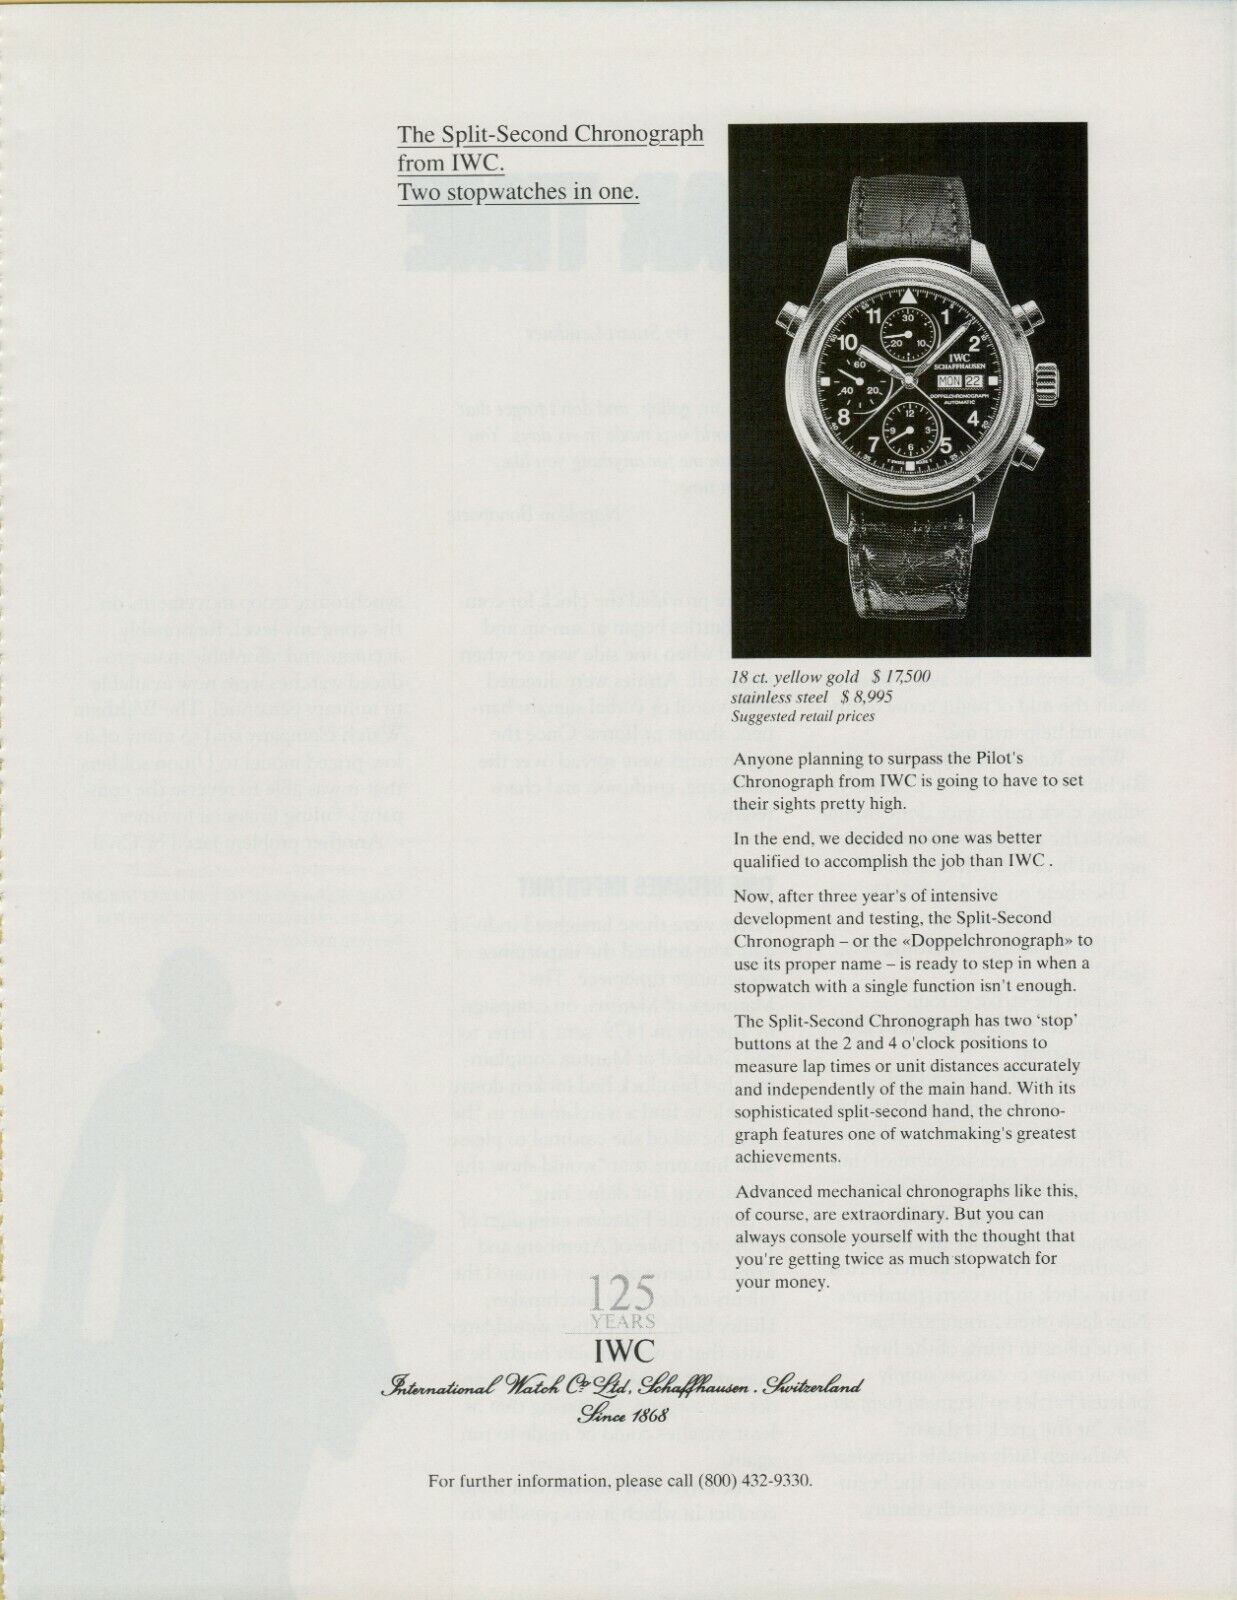 1994 IWC Split Second Chronograph Two Stopwatches in One Watch Vintage Print Ad